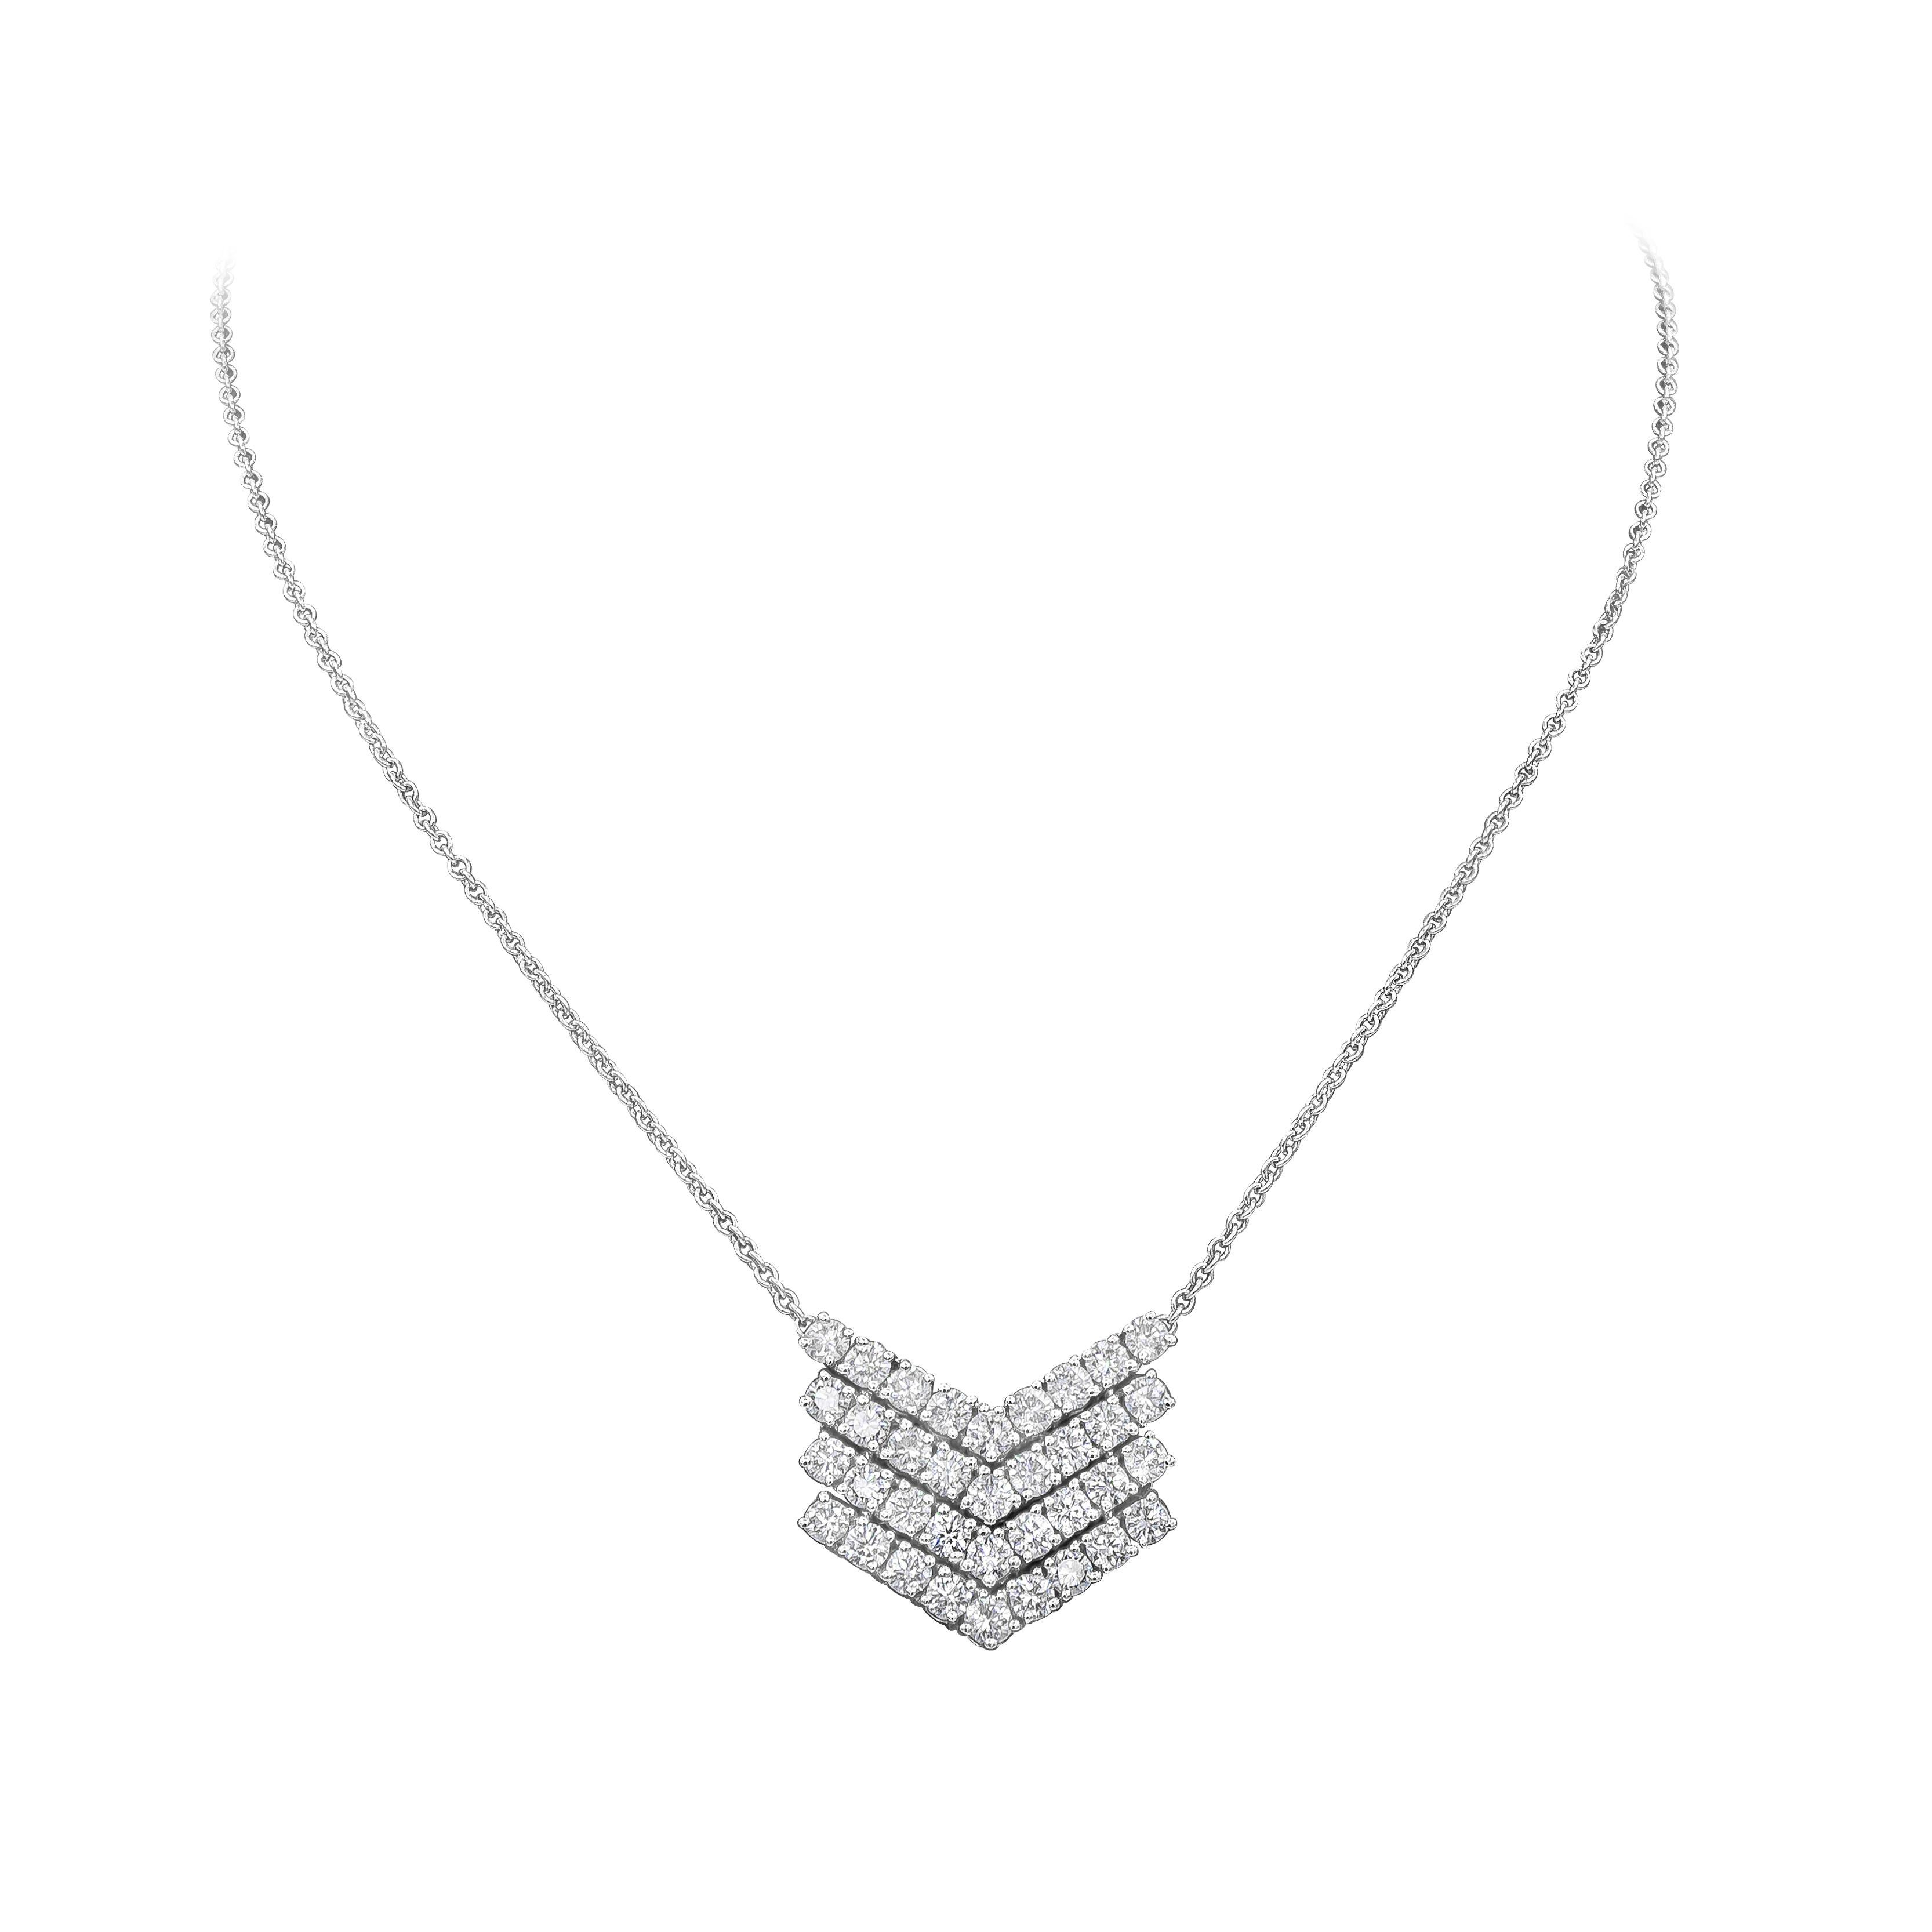 A brilliant pendant necklace showcasing four rows of round brilliant diamonds, set in an elegant chevron pattern design. Diamonds weigh 2.96 carats total. Suspended on a 16 inch adjustable white gold chain and Finely made in 18k white gold.

Style